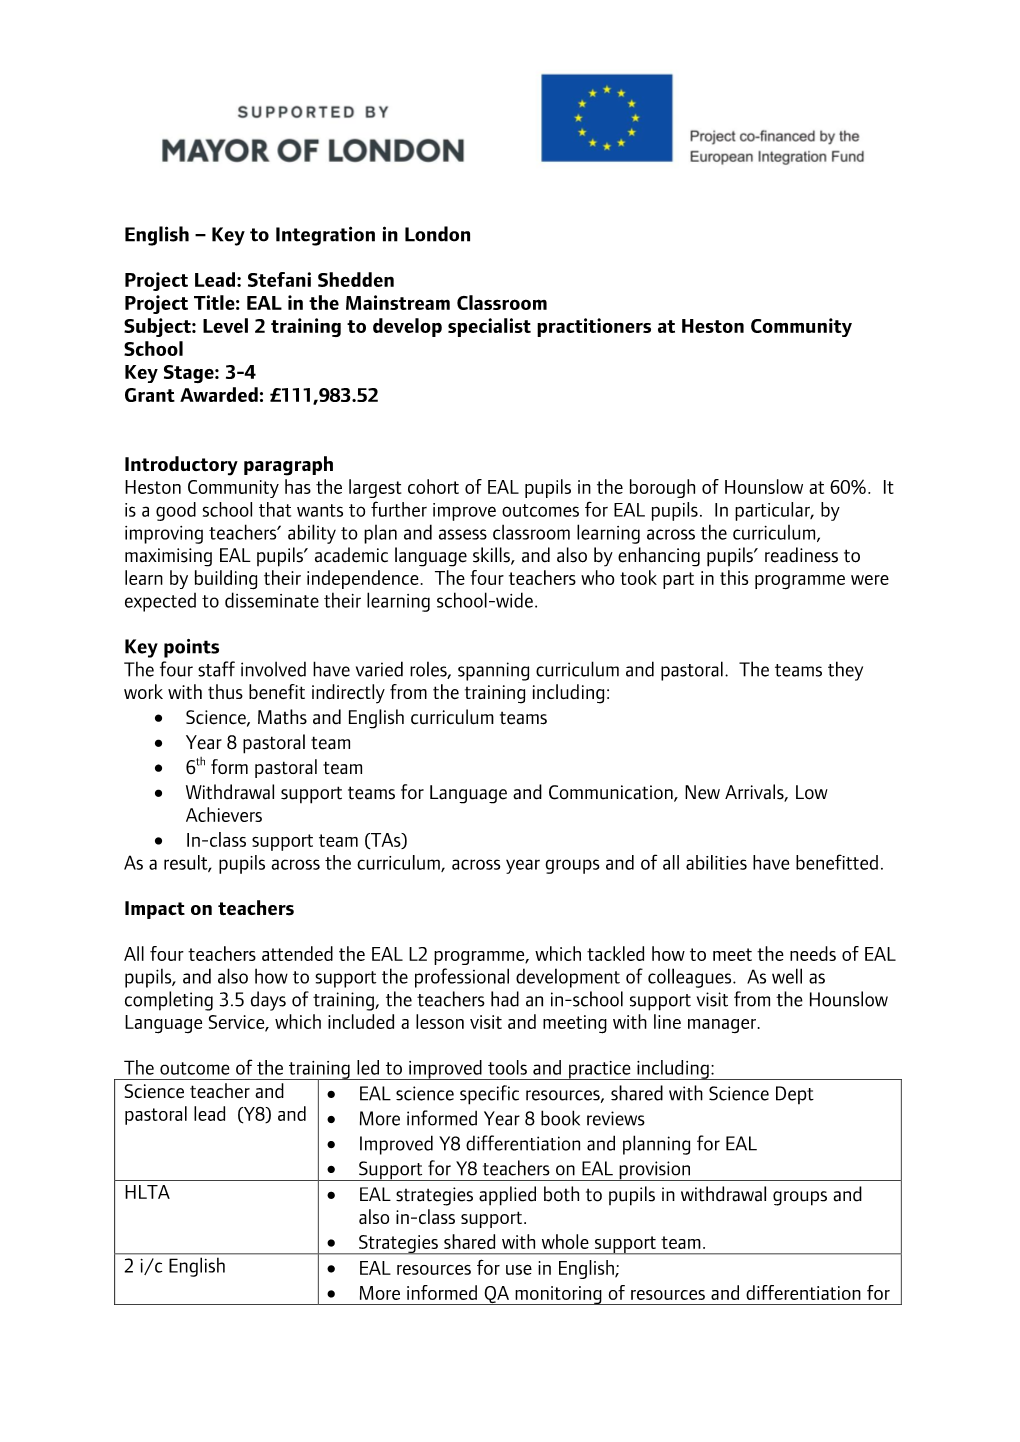 EAL in the Mainstream Classroom Subject: Level 2 Training to Develop Specialist Practitioners at Heston Community School Key Stage: 3-4 Grant Awarded: £111,983.52